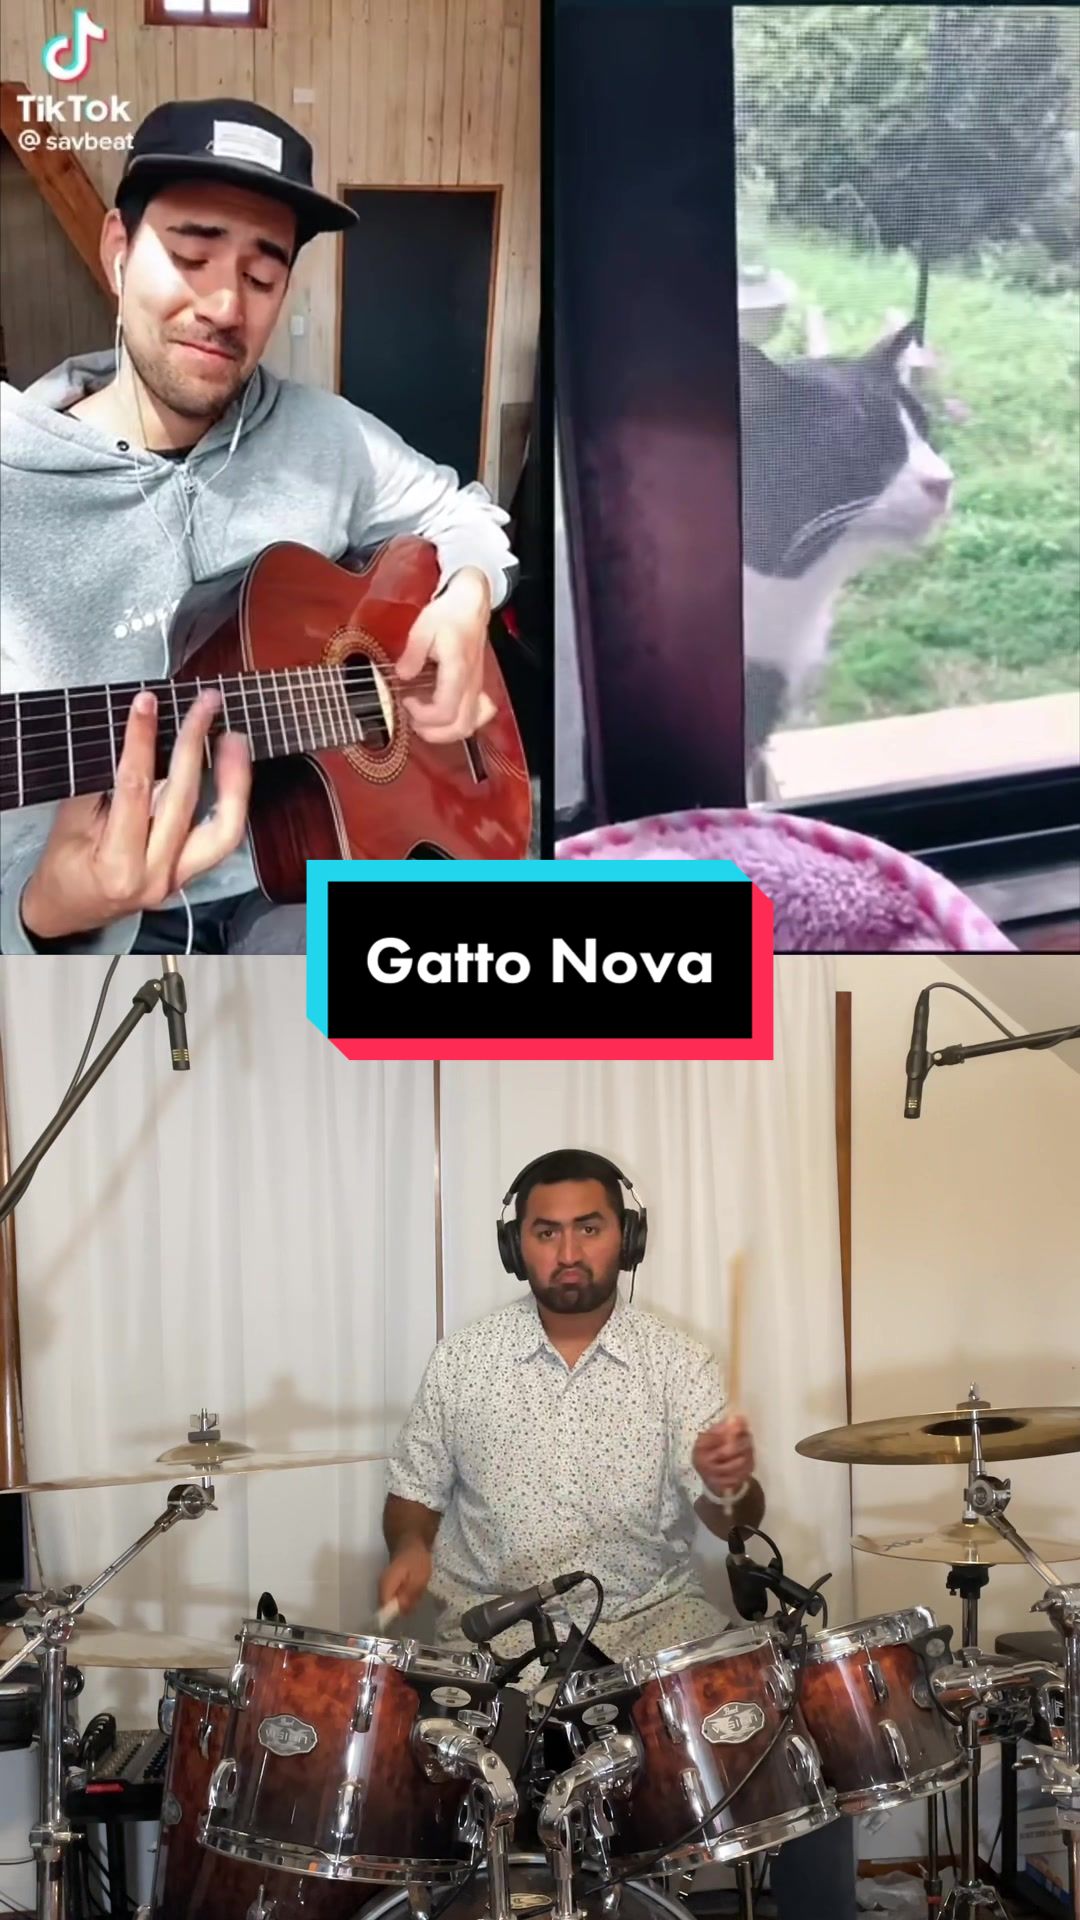 Replying to @kevster__ #duet with @savbeat no, this is gatto nova #bossanova #music #bossa #fyp #cat #samba #latin #salsa  created by Michael Tonga Music with Passion animaux 🐴🐕's son original